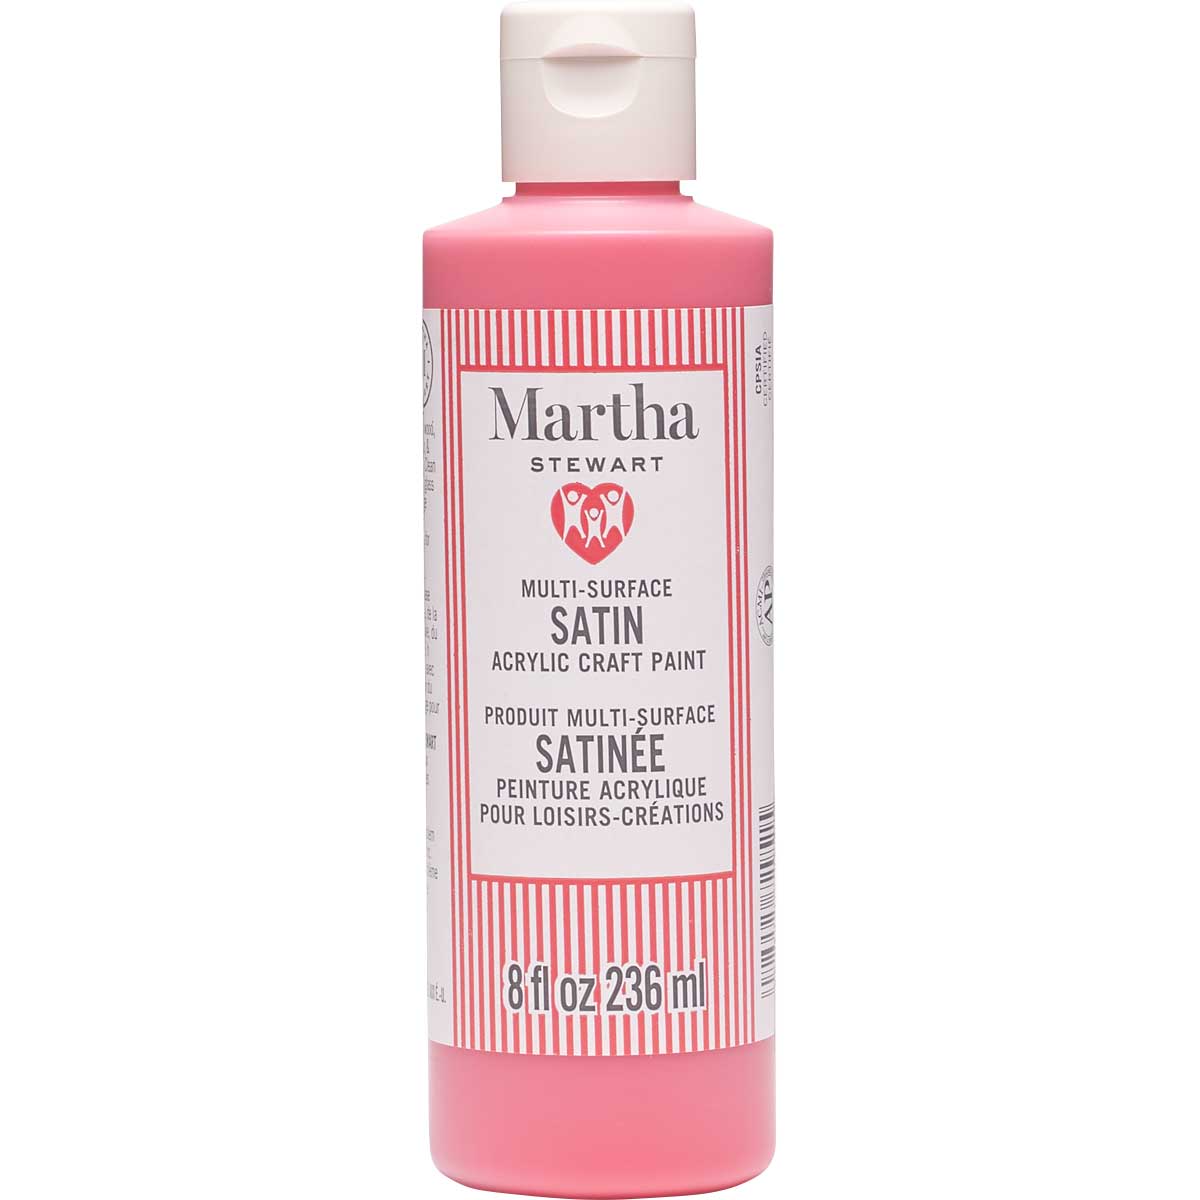 Martha Stewart ® Multi-Surface Satin Acrylic Craft Paint CPSIA - Stop Sign Red, 8 oz. - 72951